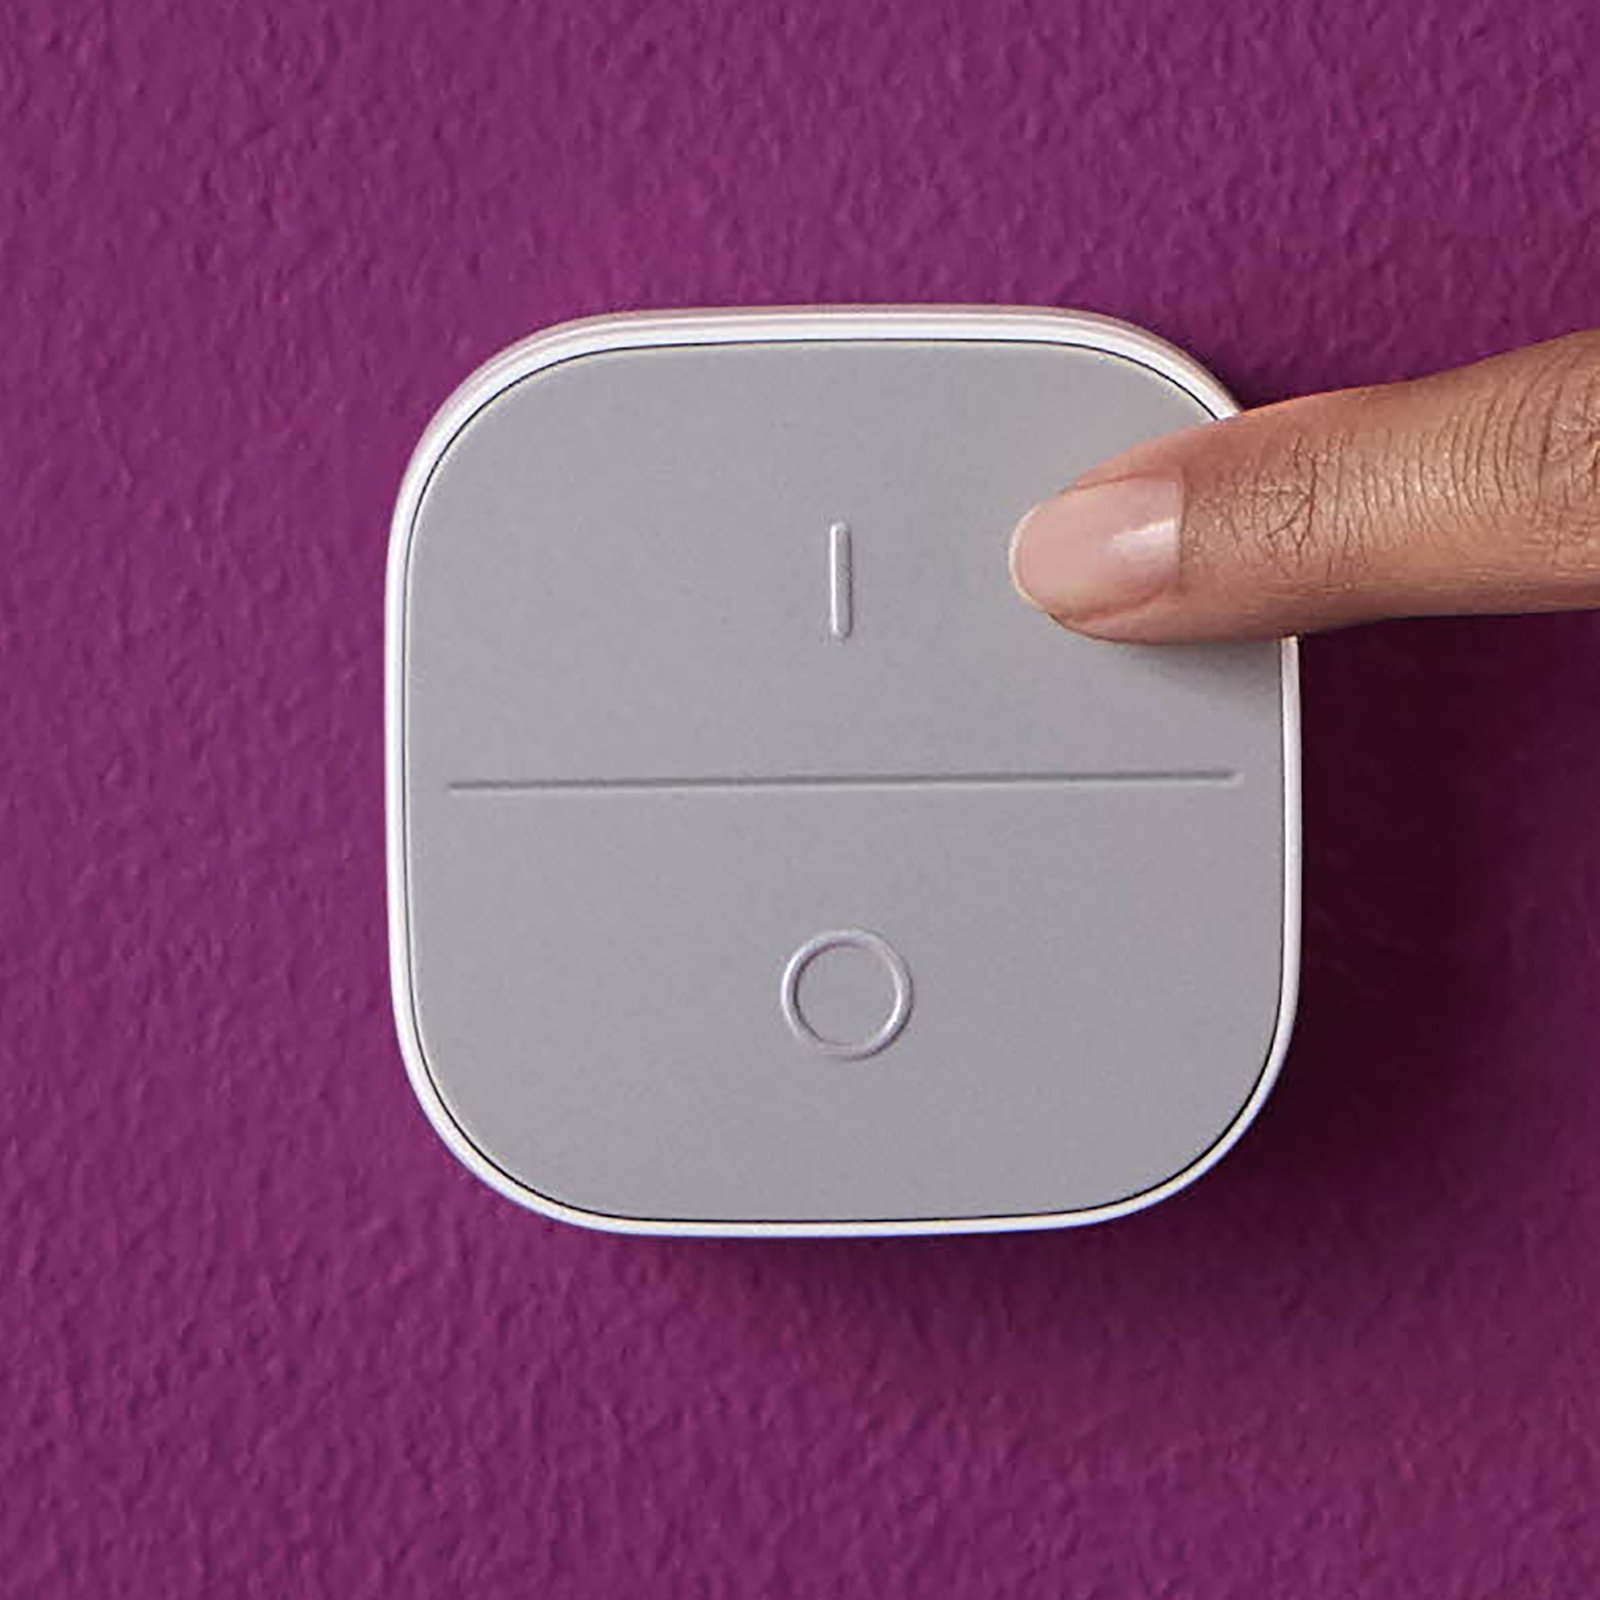 WiZ Portable Button mobile wall switch